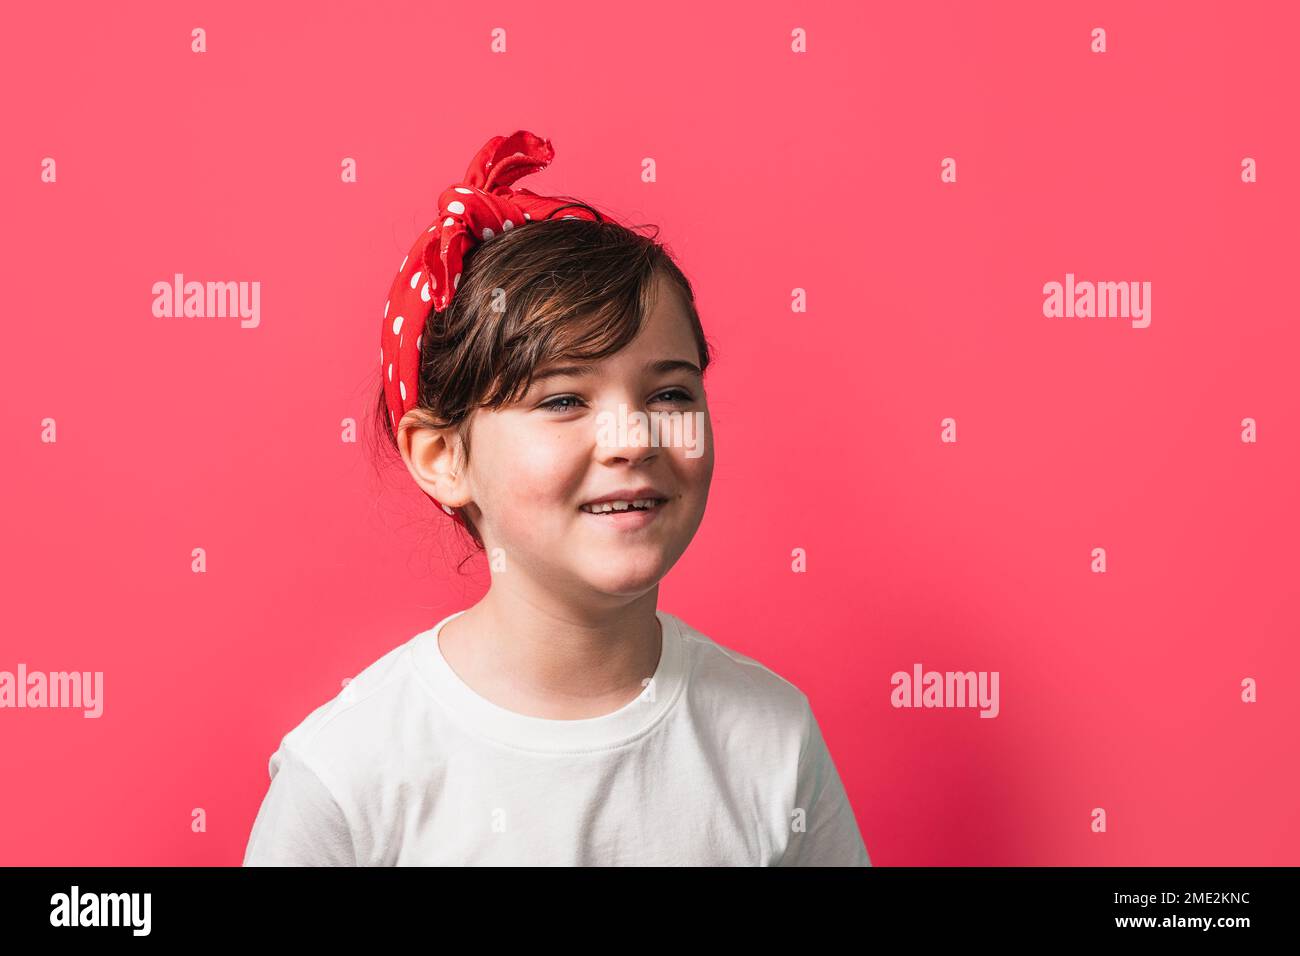 Adorable little girl in white t shirt with red polka dot headband looking away while standing against pink background Stock Photo